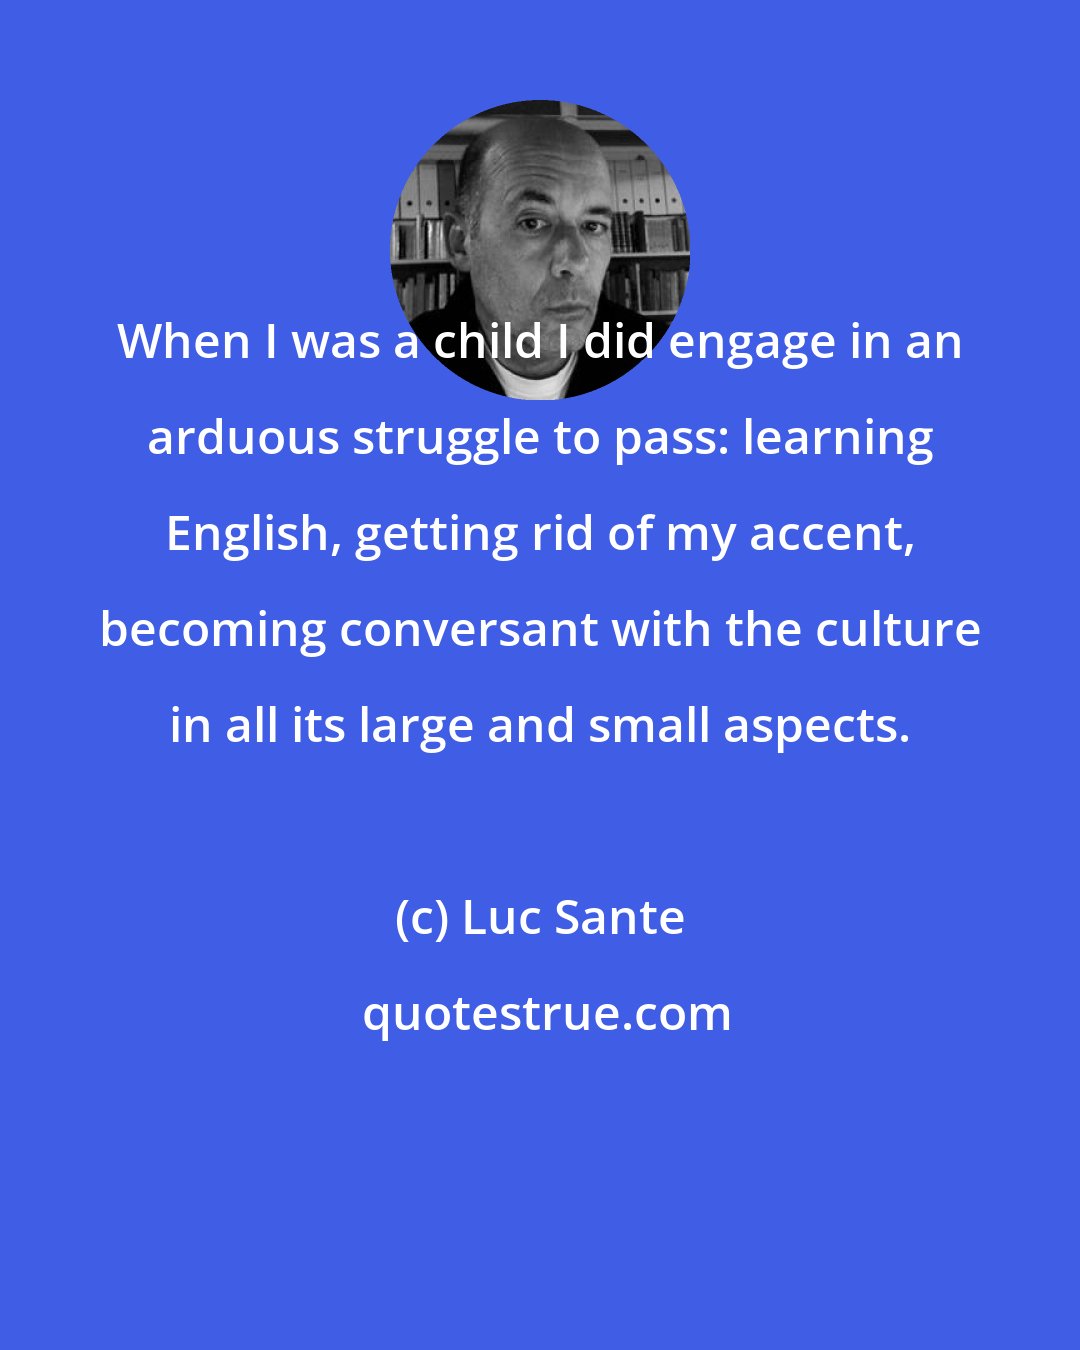 Luc Sante: When I was a child I did engage in an arduous struggle to pass: learning English, getting rid of my accent, becoming conversant with the culture in all its large and small aspects.